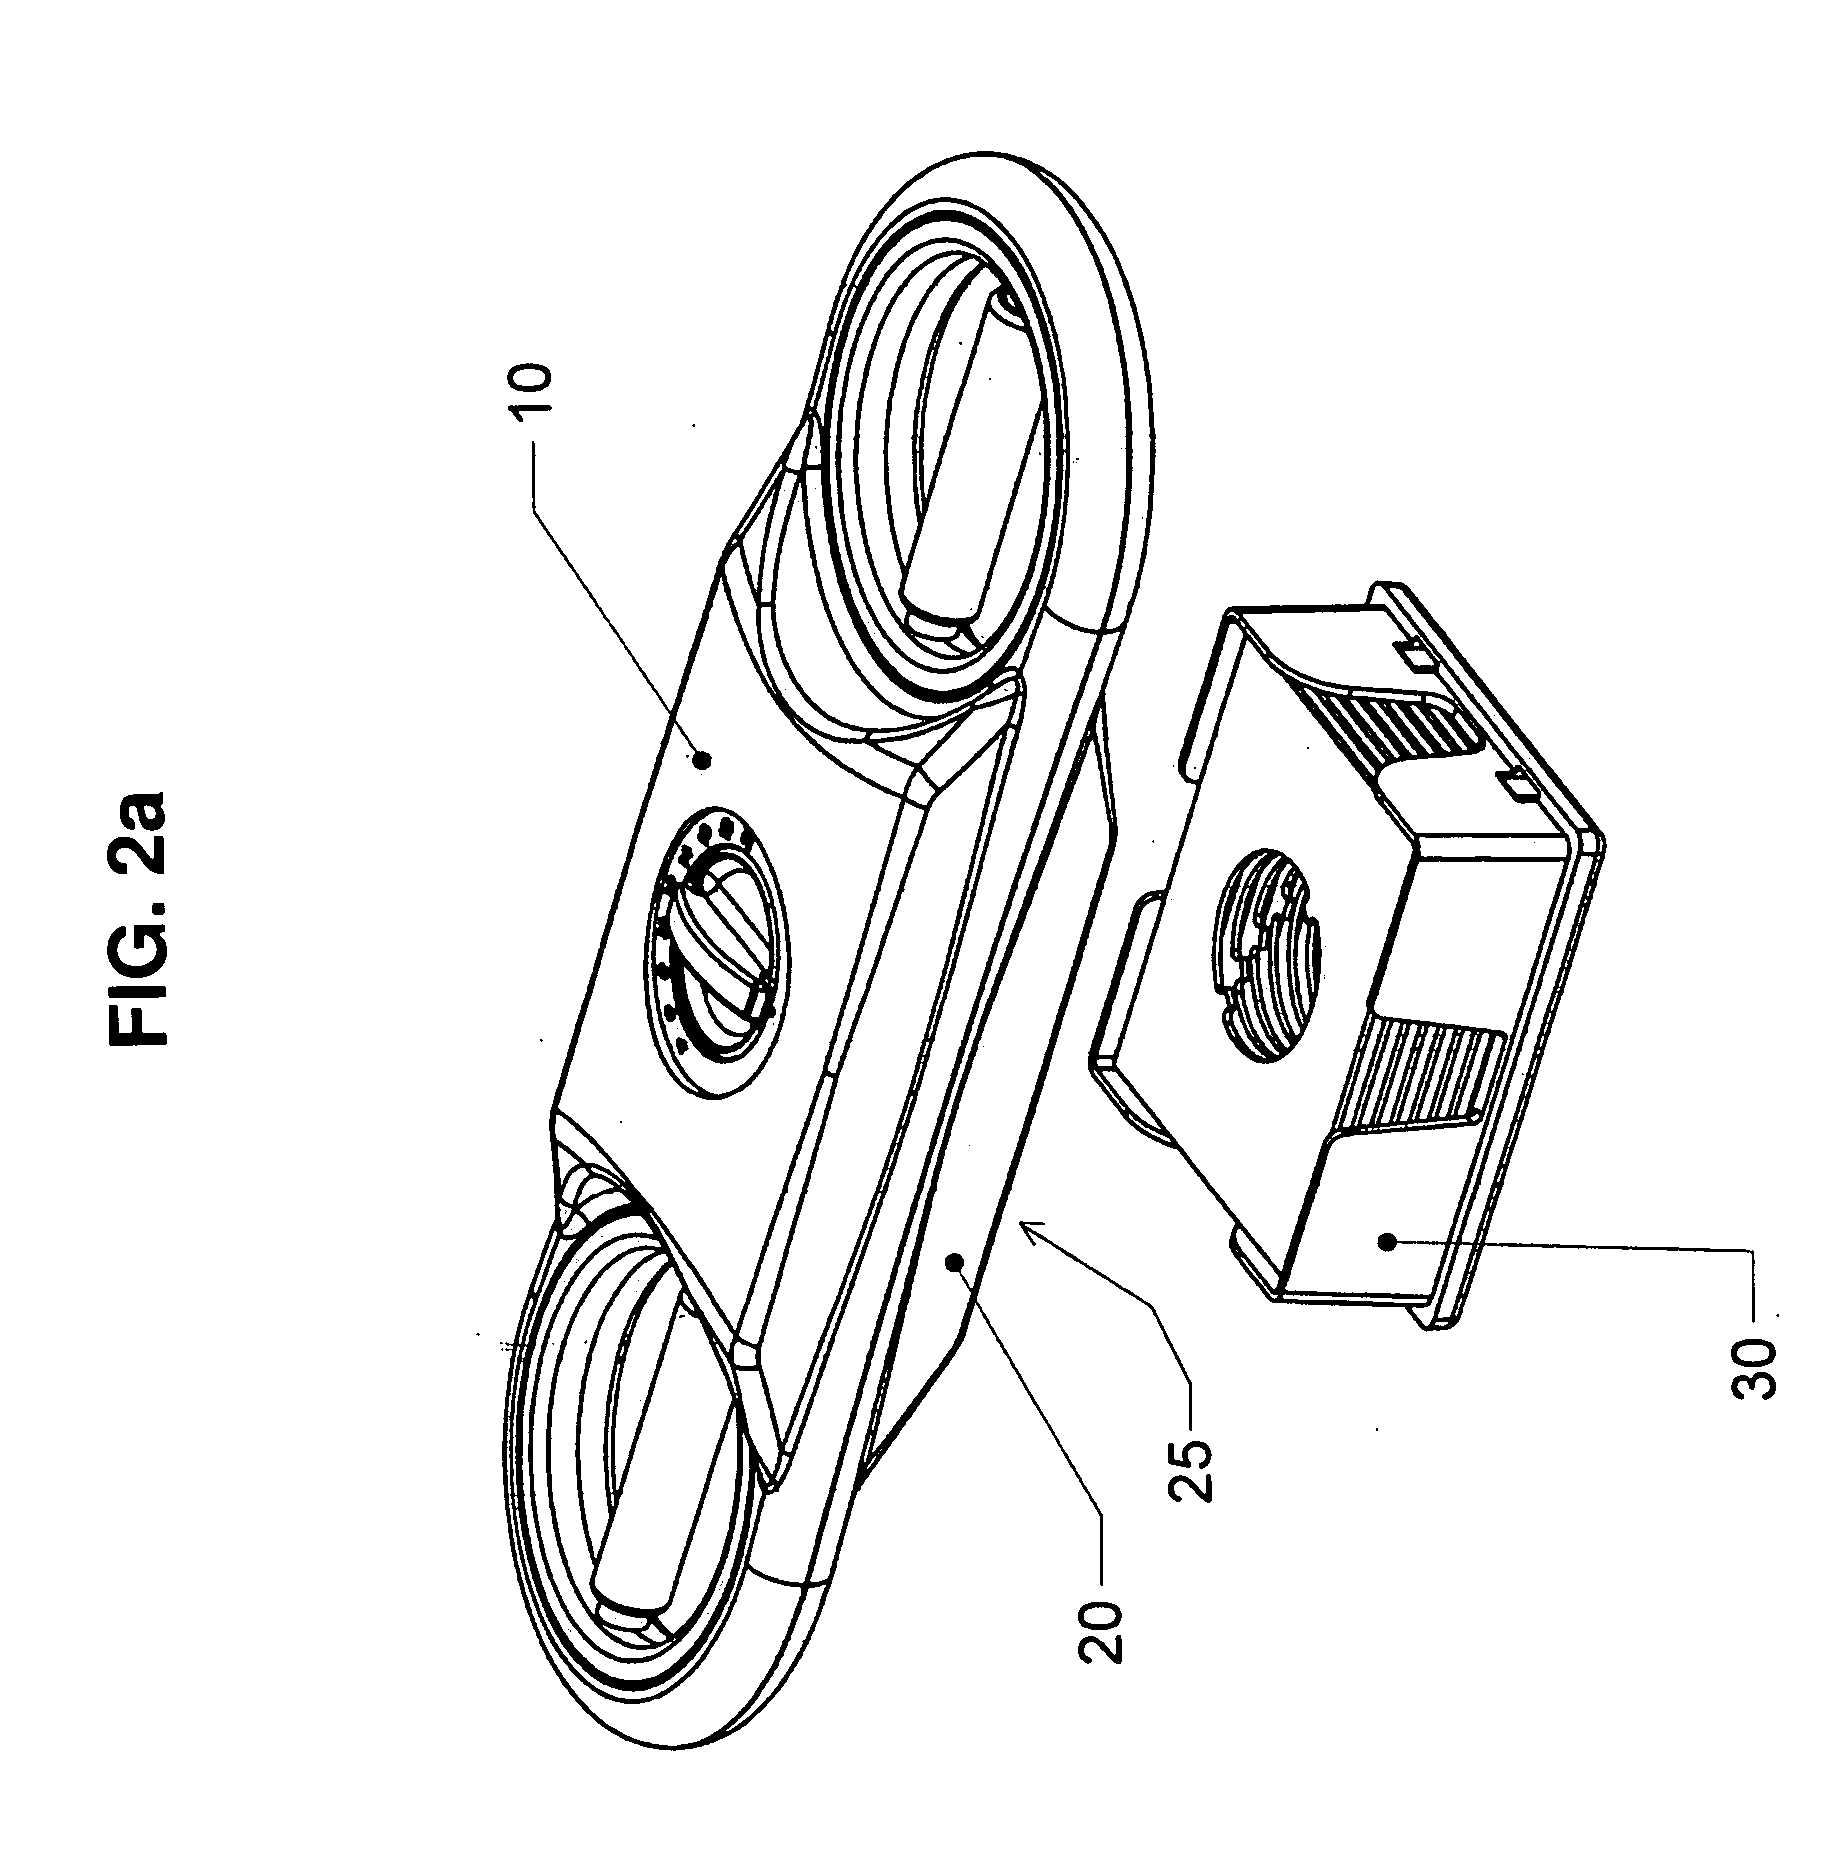 Exercise device, method of fabricating exercise device, and method and system for interaction with an exercise device